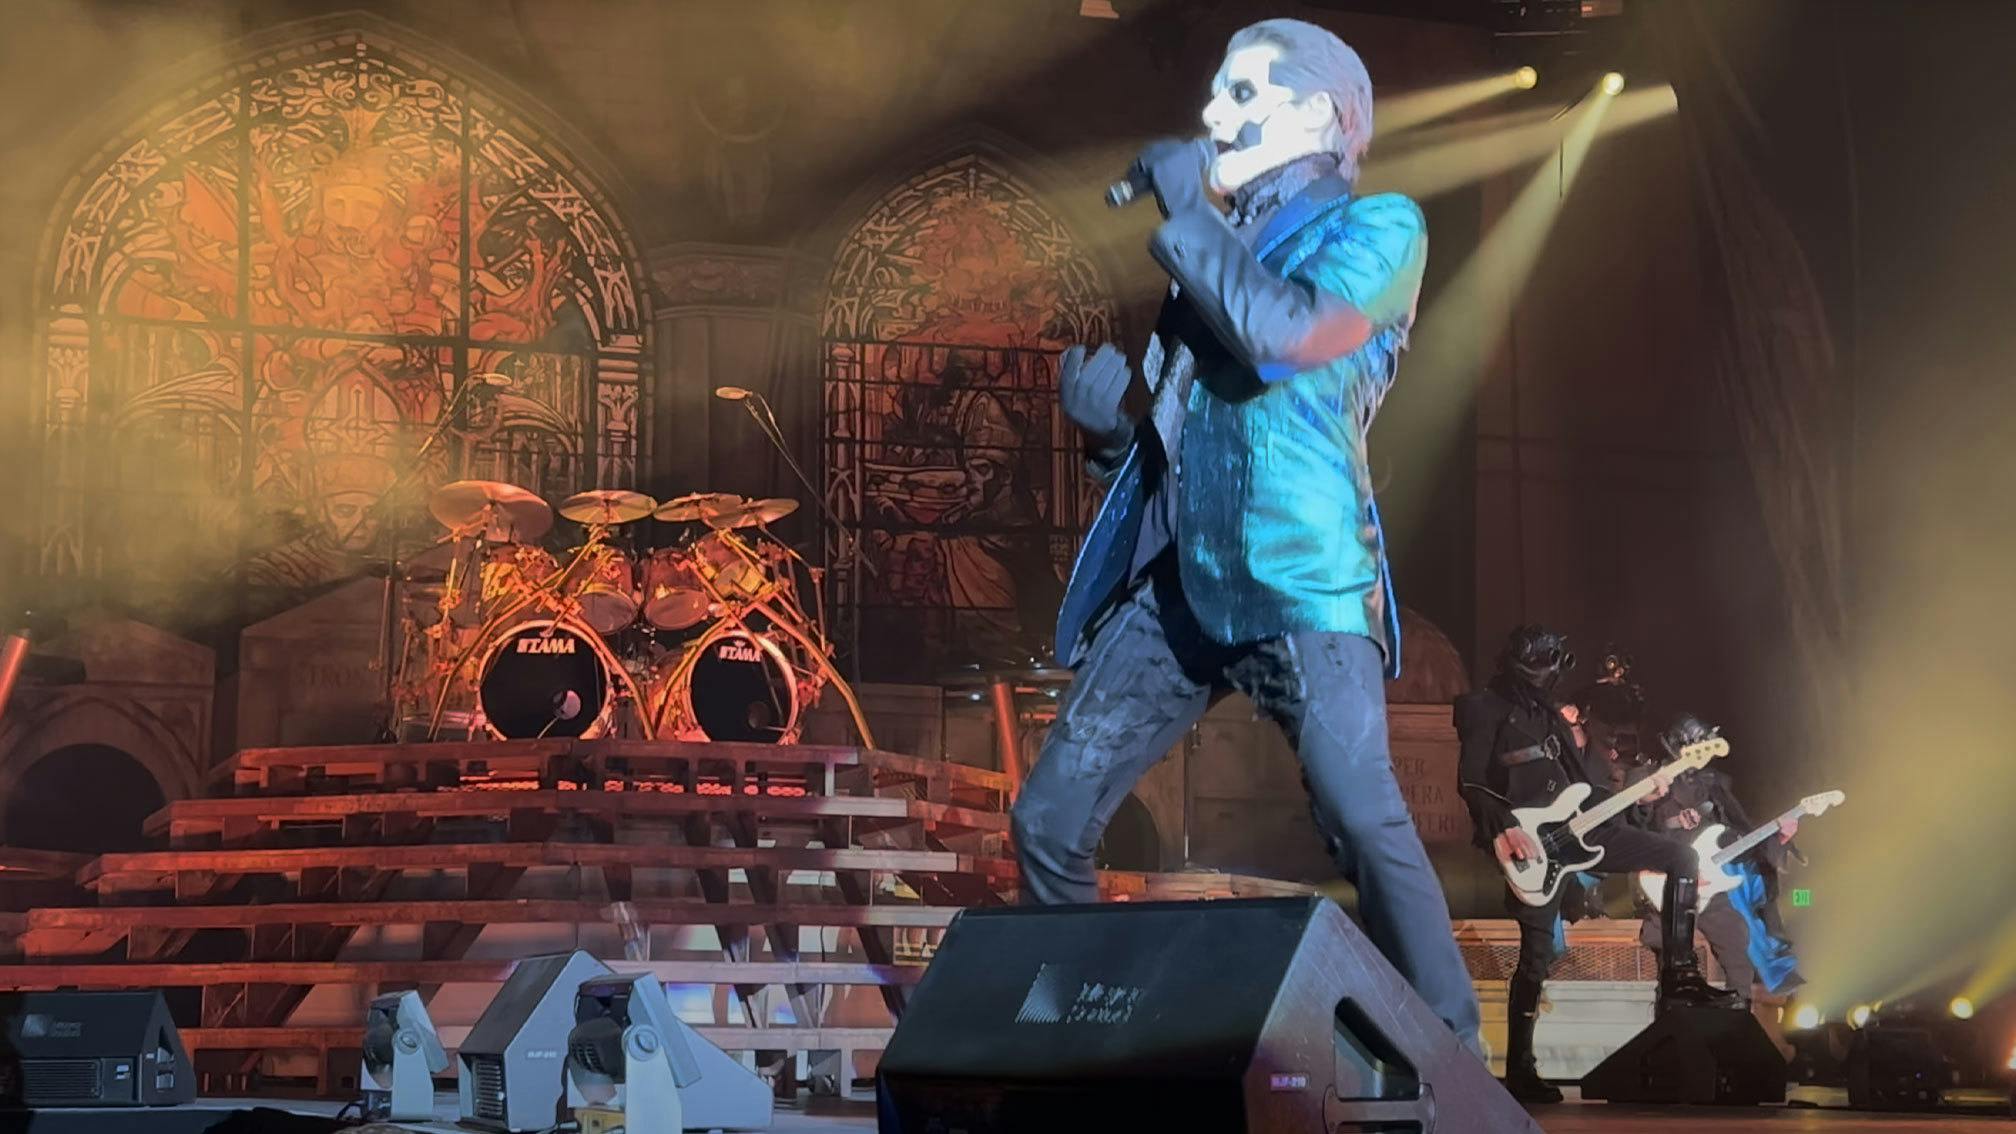 Watch: Ghost unveil new song Kaiserion on first night of U.S. tour